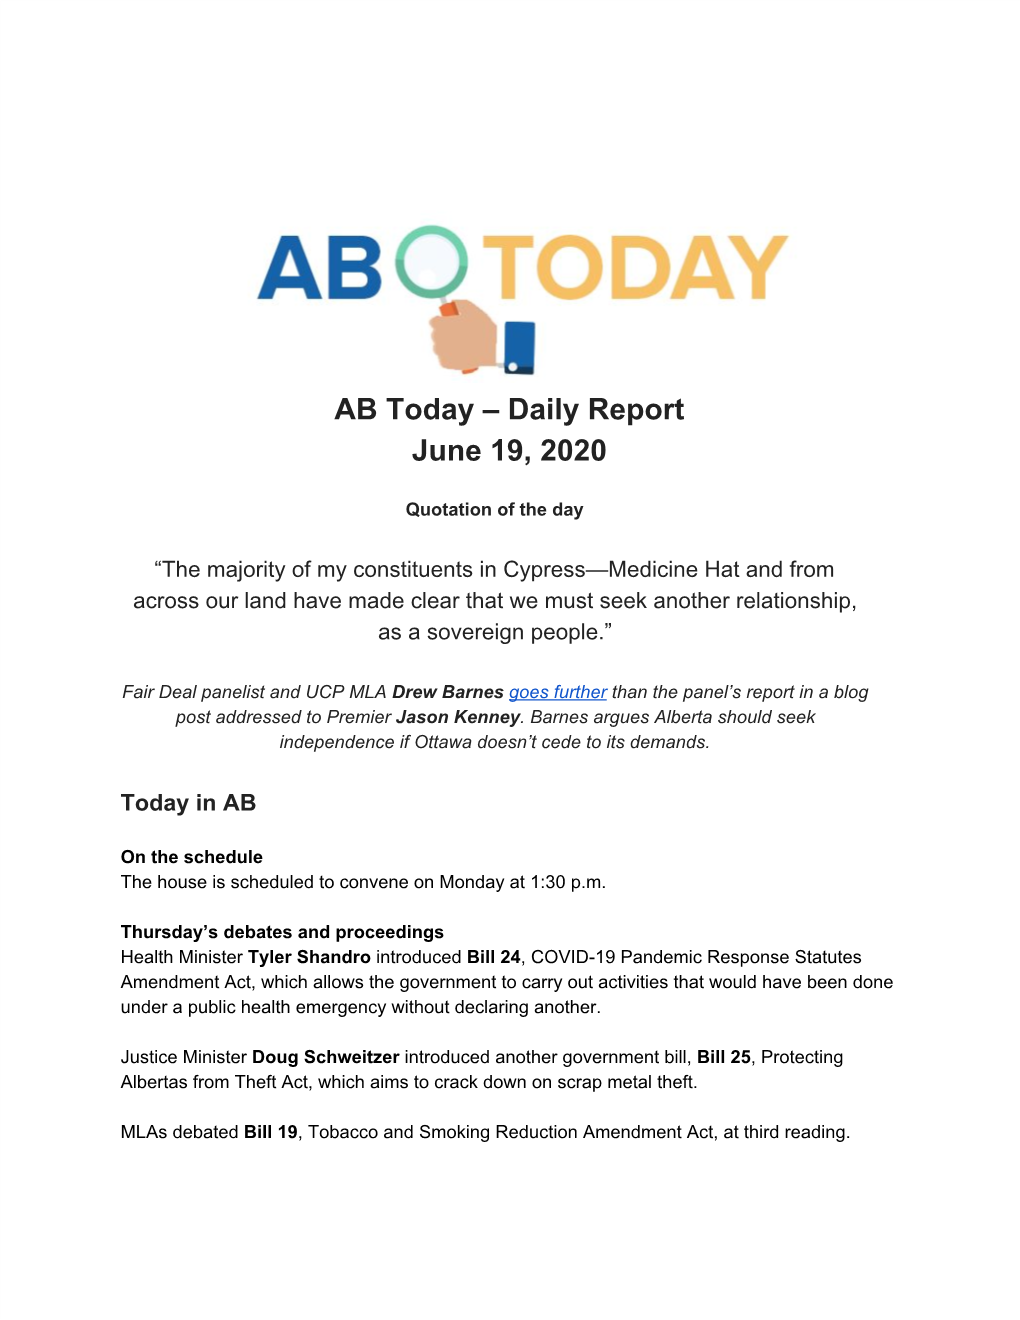 AB Today – Daily Report June 19, 2020